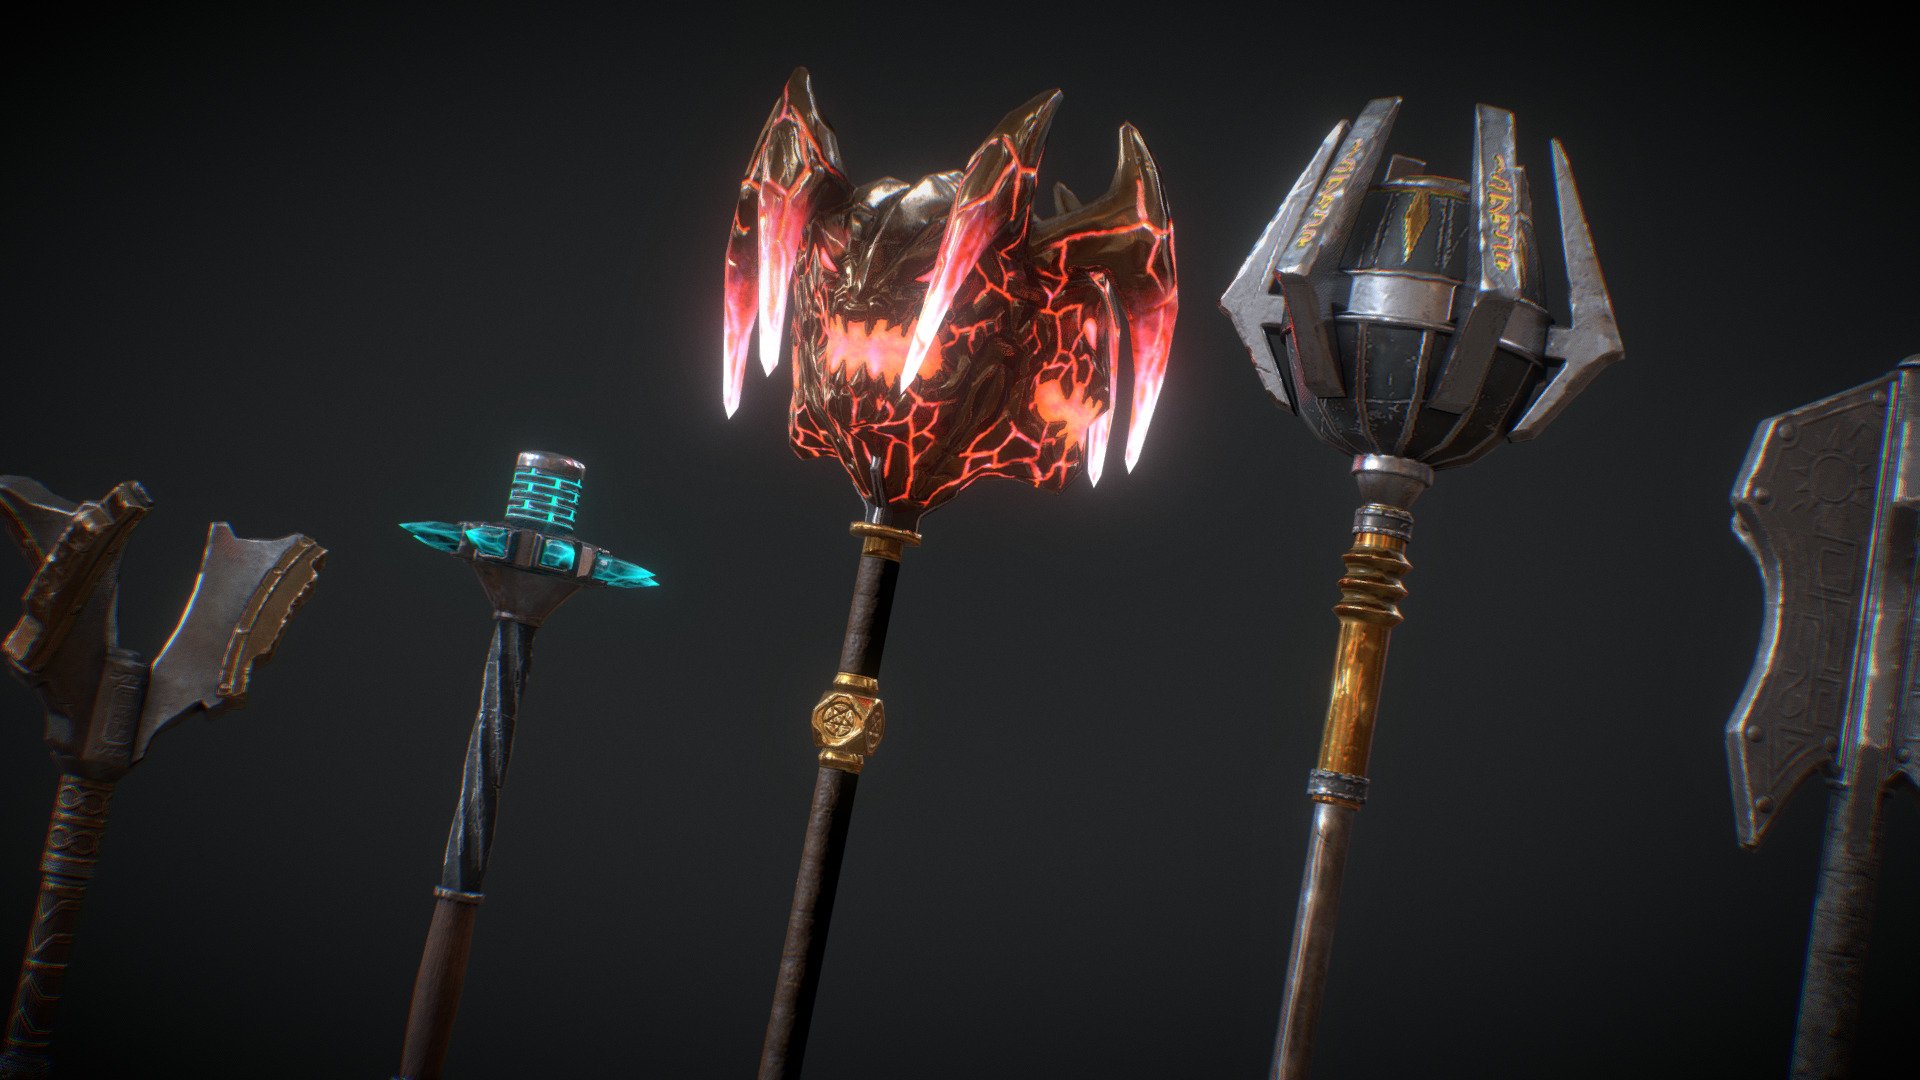 5 Fantasy Mace - PBR- Low Poly

This model content 5 Fantasy Mace - Including Unlit TGA texture in the asset




The Sword size is 116 cm height to 75 cm

Triangle count of this asset from 1492 to  1182

Texture is 1024 x 512 for each assets

Including RMA (Roughness, Metaliness, AO) map for optimization

Polycount is perfect for third person weapon or lot of enemy holding the weapon

Screenshot Render in Marmoset Toolbag 3

Normal map format is DirectX (-Y)

Texture type-
* Albedo
* Normal
* Roughness
* Metalness
* AO
* Emissive
* Diffuse only/ Unlit

File Format: FBX, OBJ, TGA

This assets can be used for any project including game, movie, novel graphic, advertisement, personel project and etc. You may not resell or distribute any content of the asset - 5 Fantasy Stylish Mace - PBR - Low Poly - Buy Royalty Free 3D model by RavenLoh 3d model